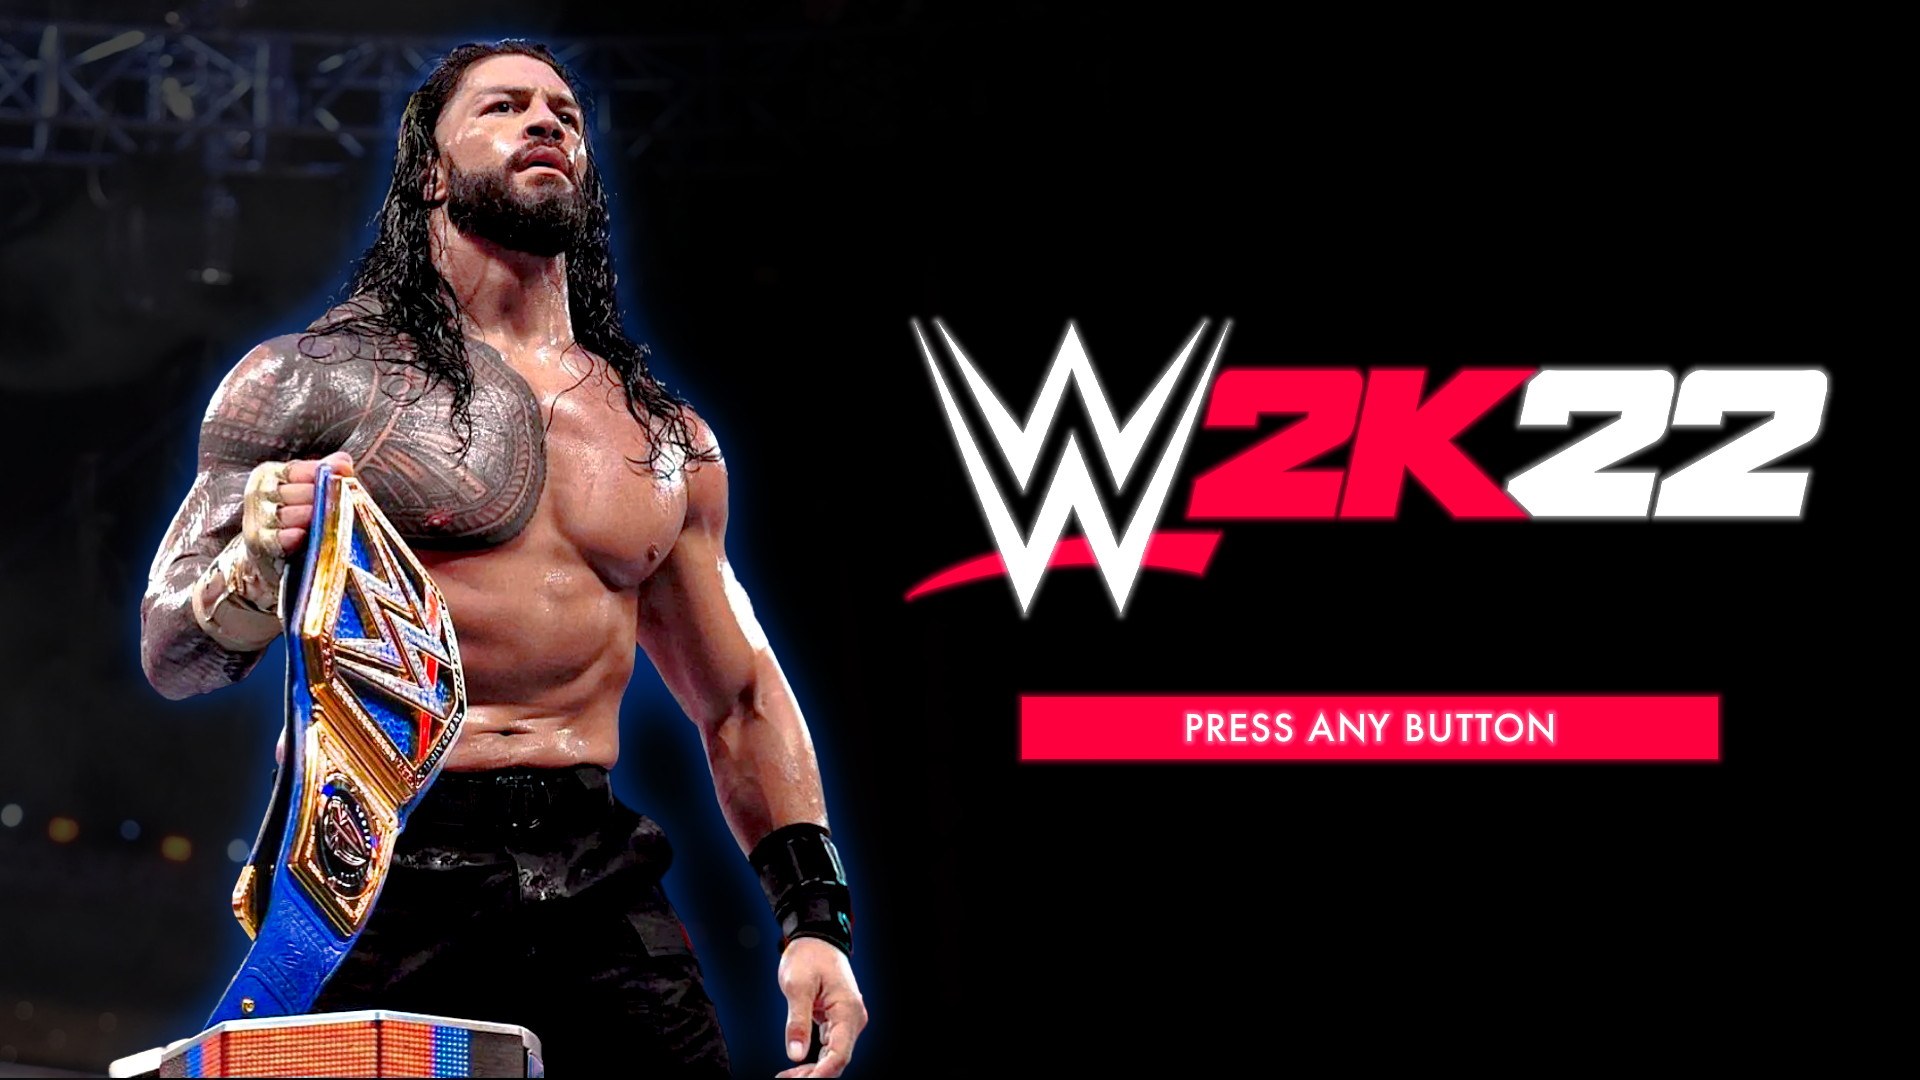 My take on what the WWE 2K22 screens would look like!: WWEGames